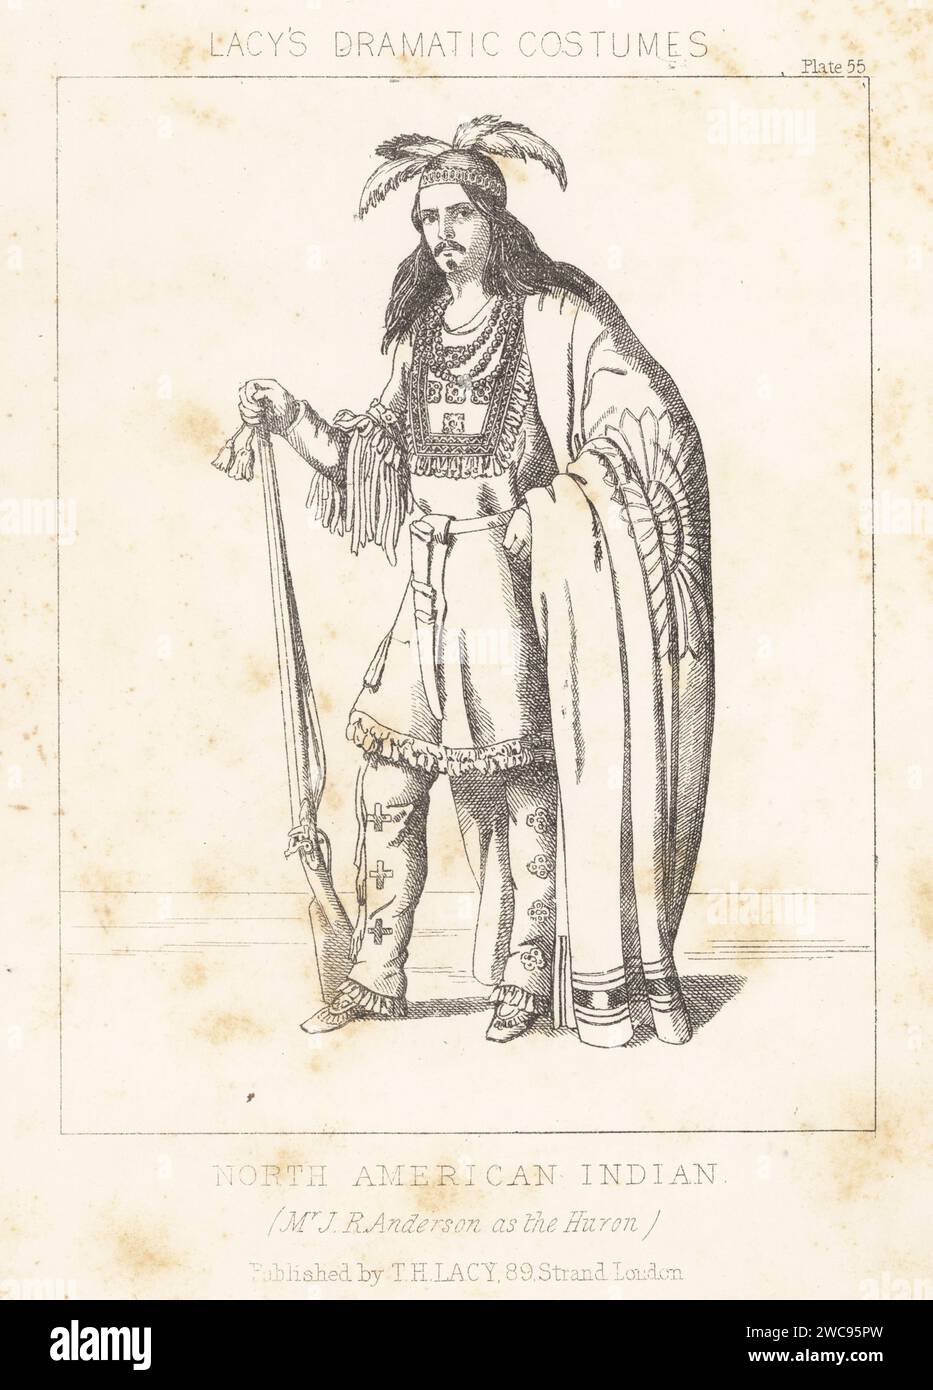 James R. Anderson, English actor, 1811-1895, as the lead in Civilization (based on Voltaire's play Huron or L'Ingenu), 1853. Costume of a Huron or Wyandot man, North American Indian. Feather headdress, painted cloak, embroidered animal skin tunic and gaiters, with musket. Lithograph from Thomas Hailes Lacy's Male Costumes, Historical, National and Dramatic in 200 Plates, London, 1865. Lacy (1809-1873) was a British actor, playwright, theatrical manager and publisher. Stock Photo